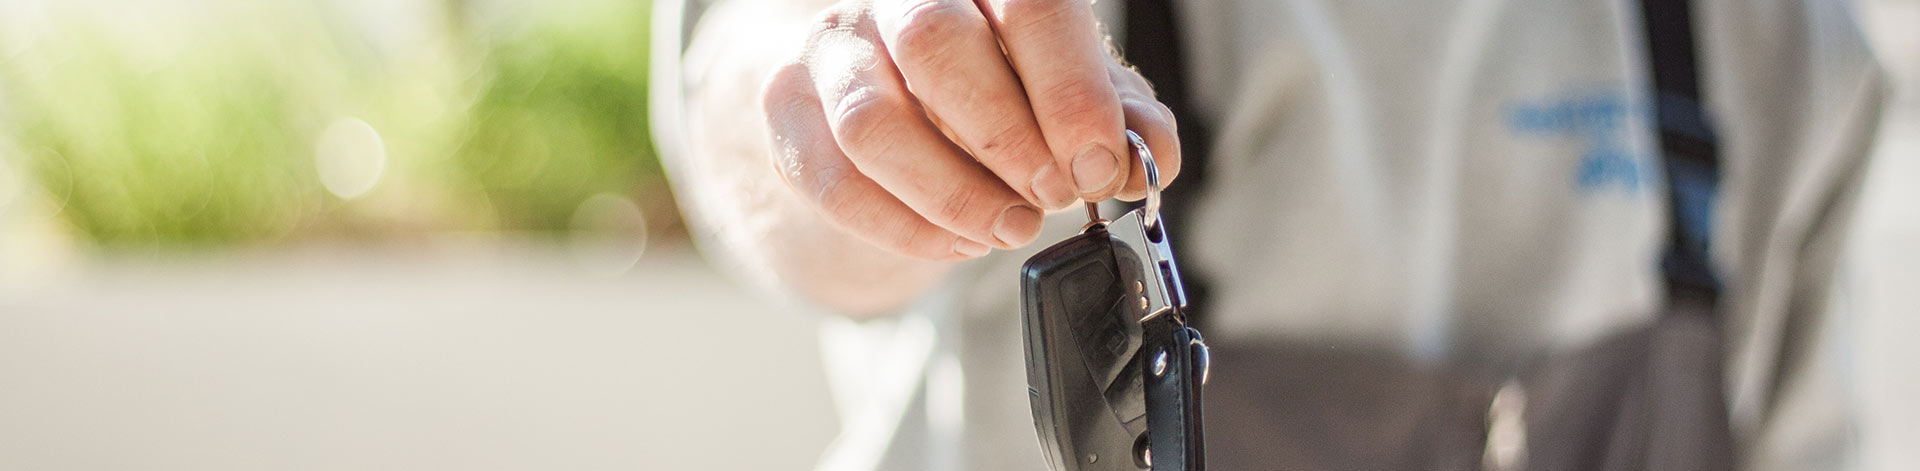 THE BEST 10 Locksmiths in Queens, NY